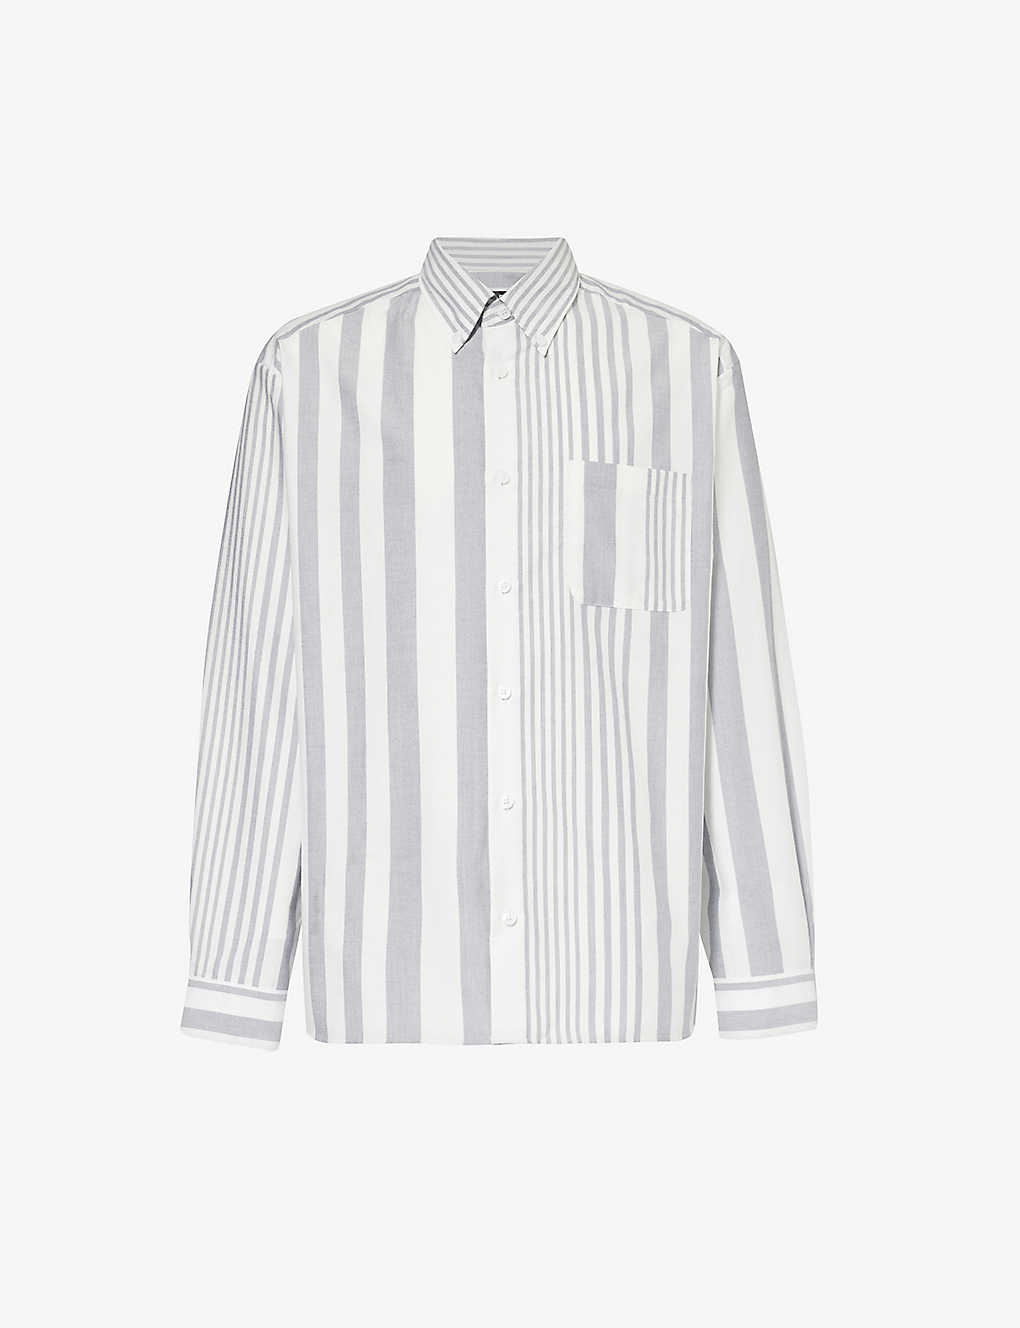 Apc Mens Grey White Striped Relaxed-fit Cotton Shirt